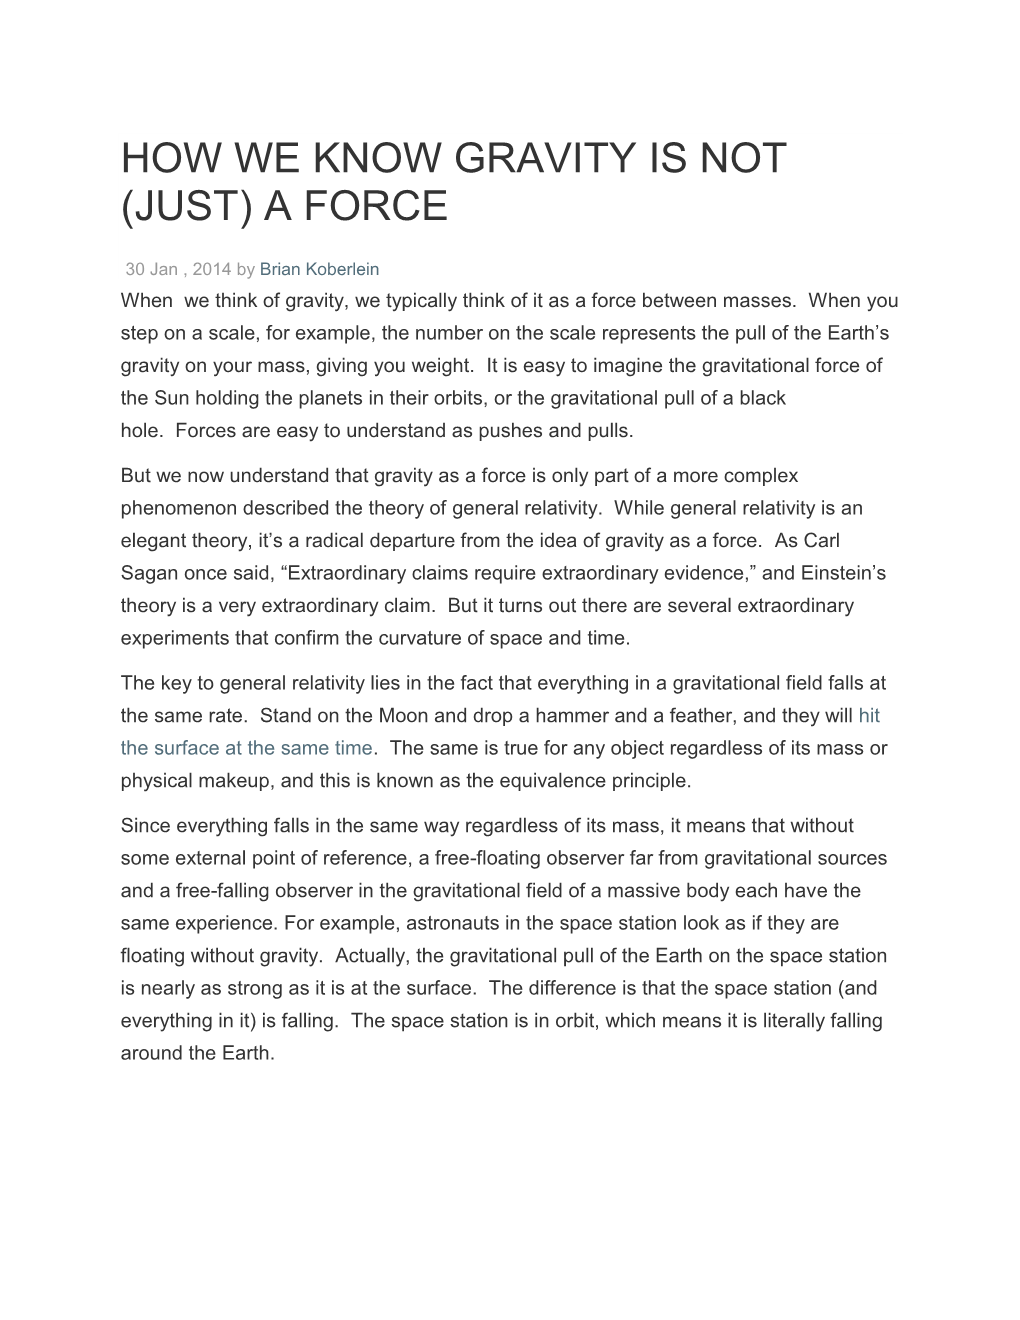 How We Know Gravity Is Not (Just) a Force